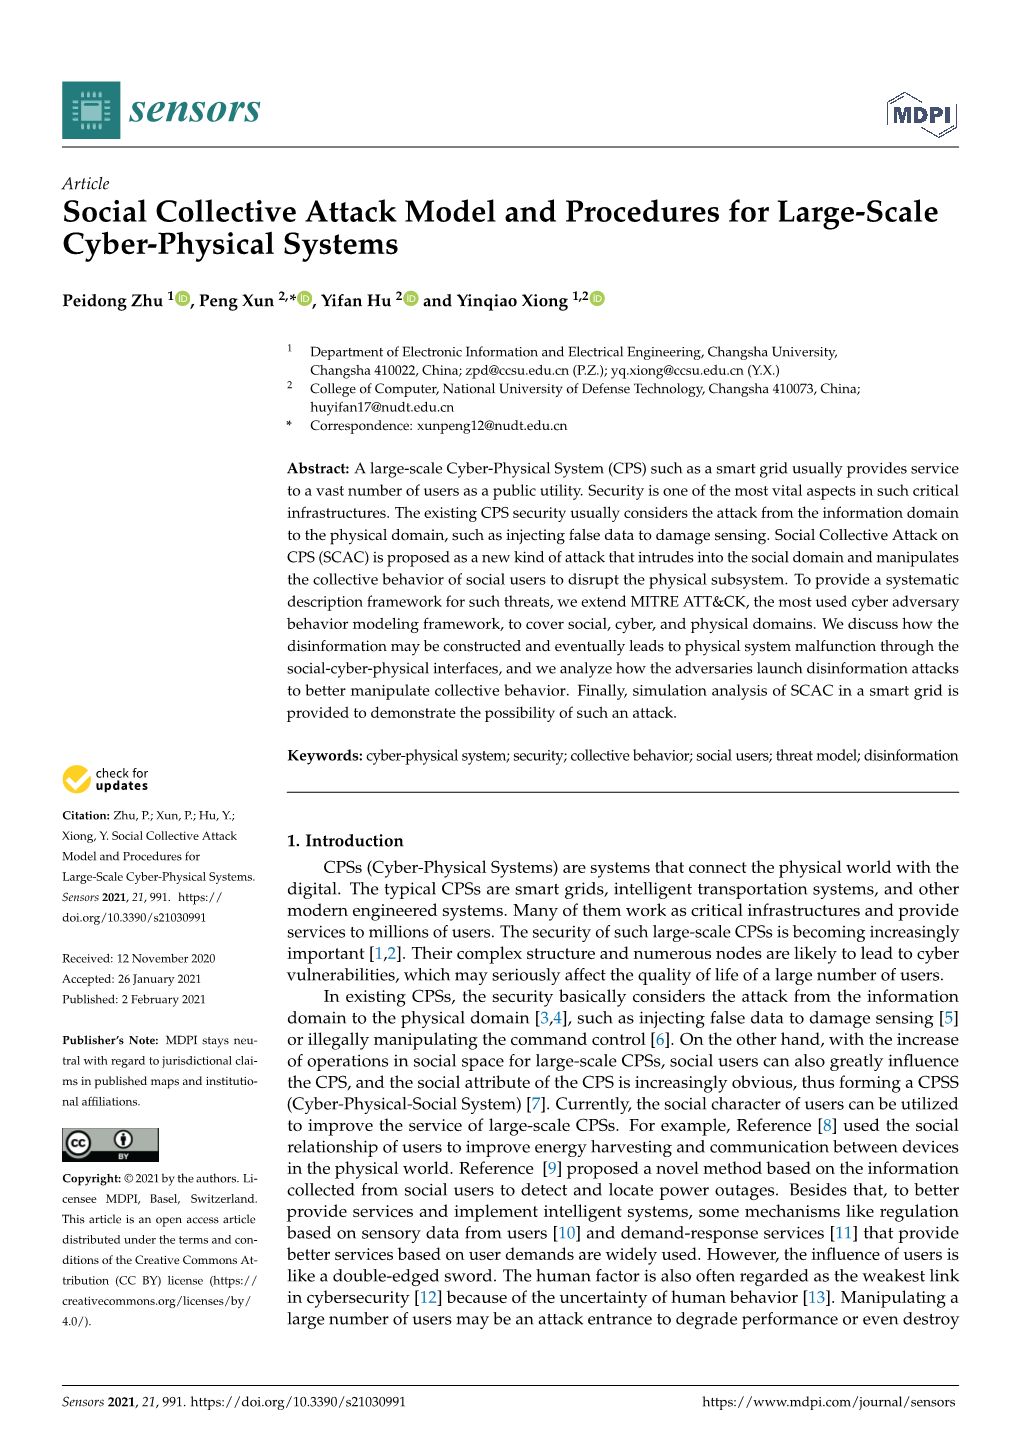 Social Collective Attack Model and Procedures for Large-Scale Cyber-Physical Systems